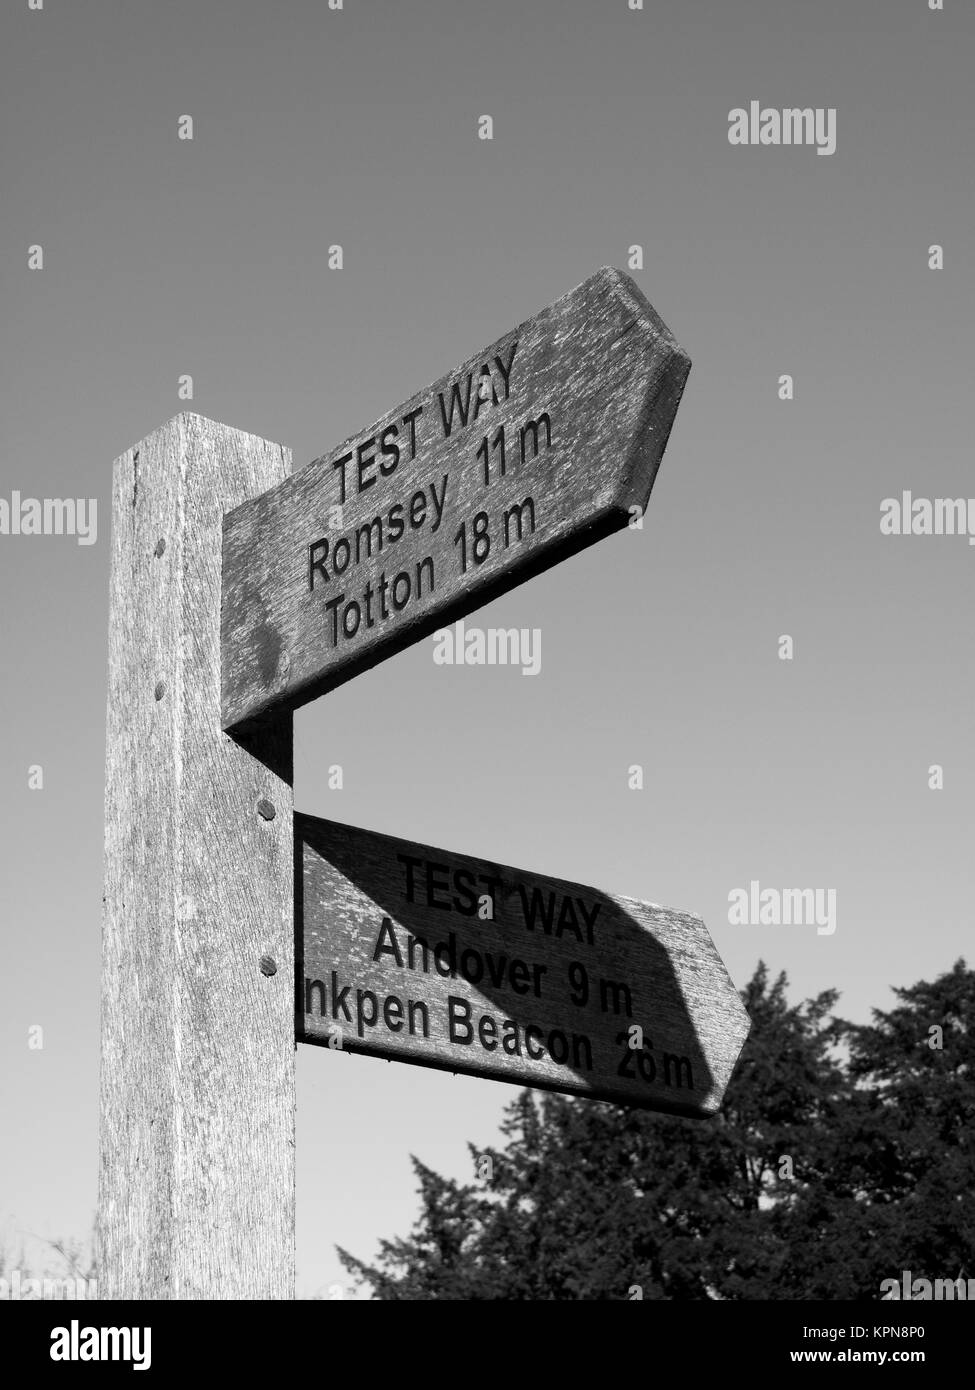 Timber Test Way direction sign to Romsey and Totton Stock Photo